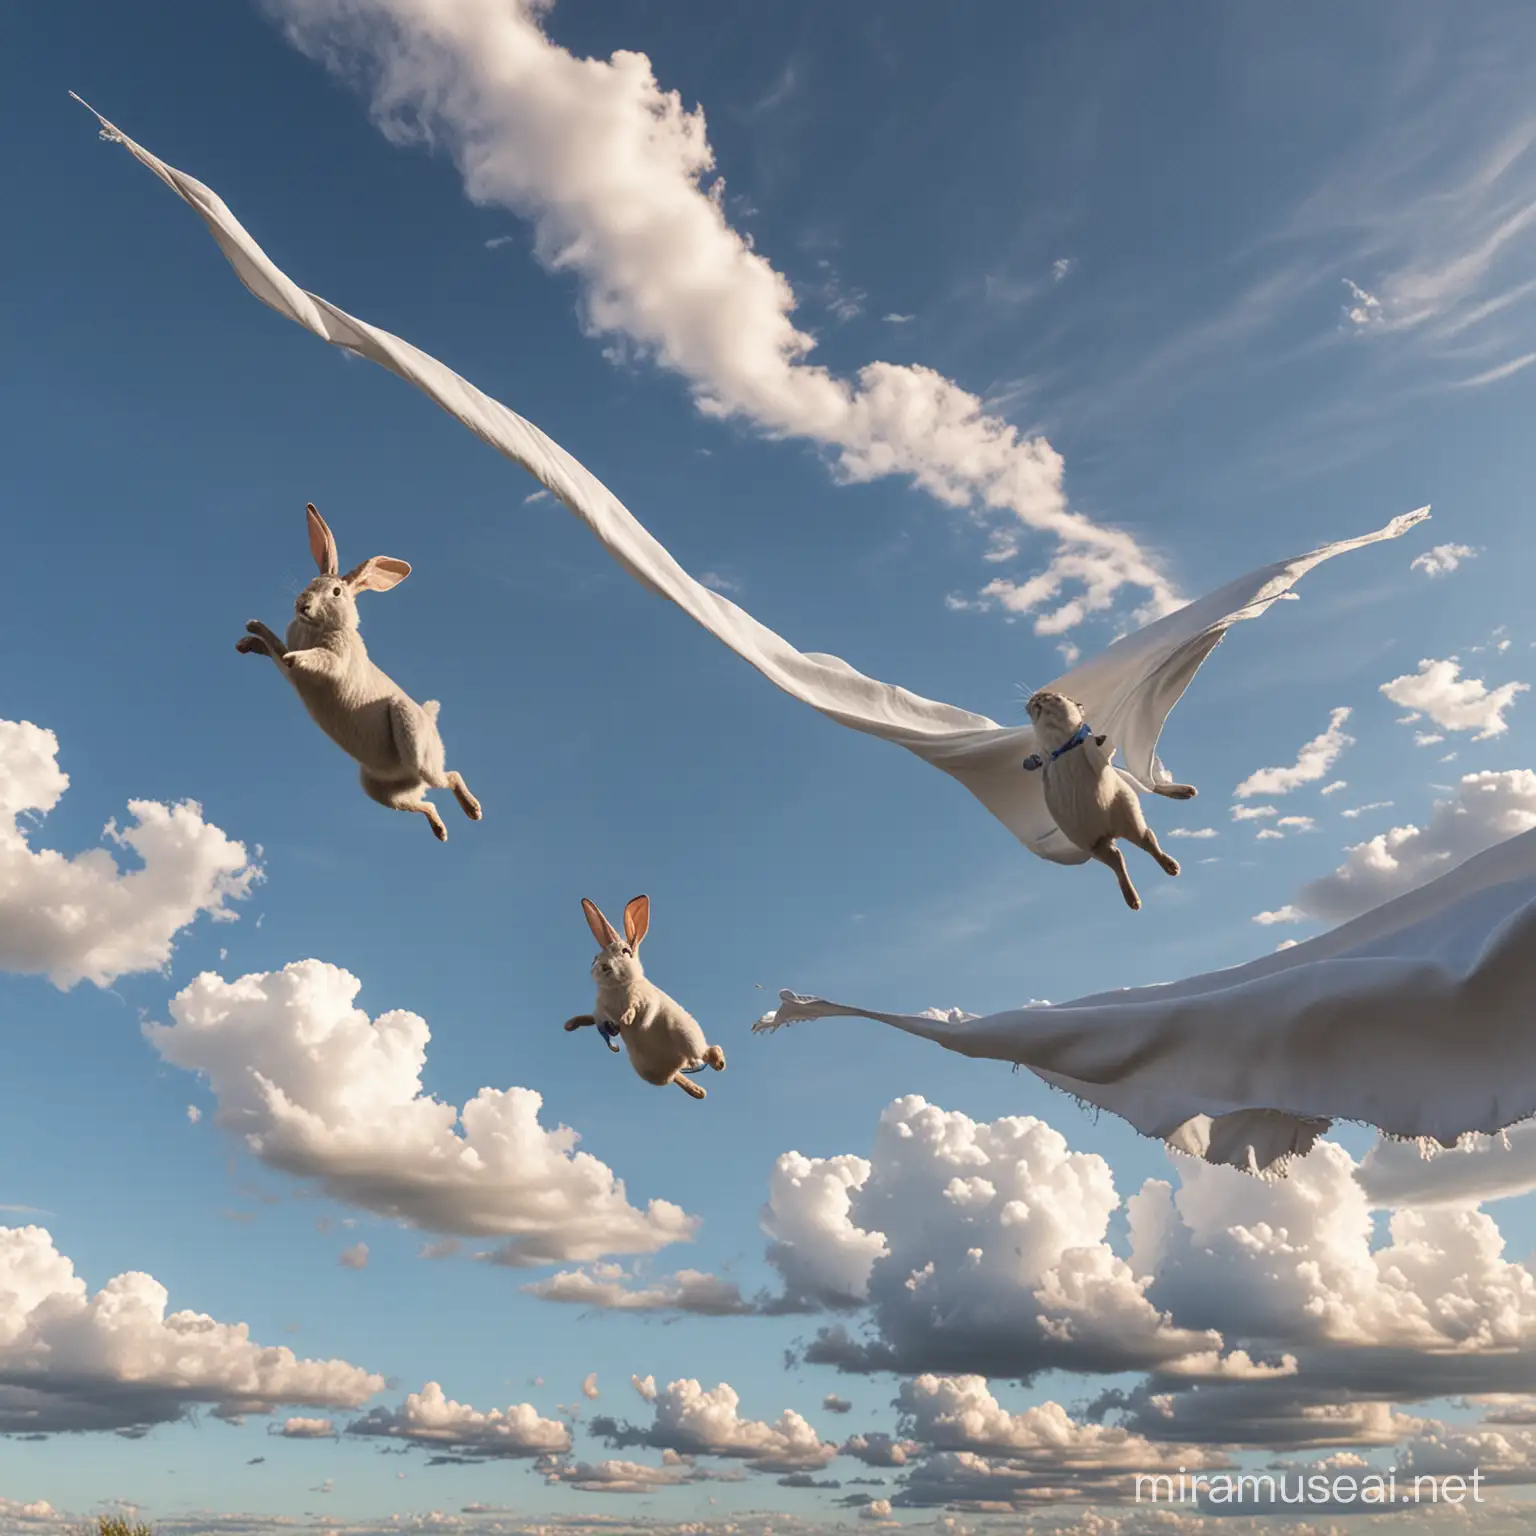 Graceful Cloth Soaring Amidst Blue Sky with Rabbits Below